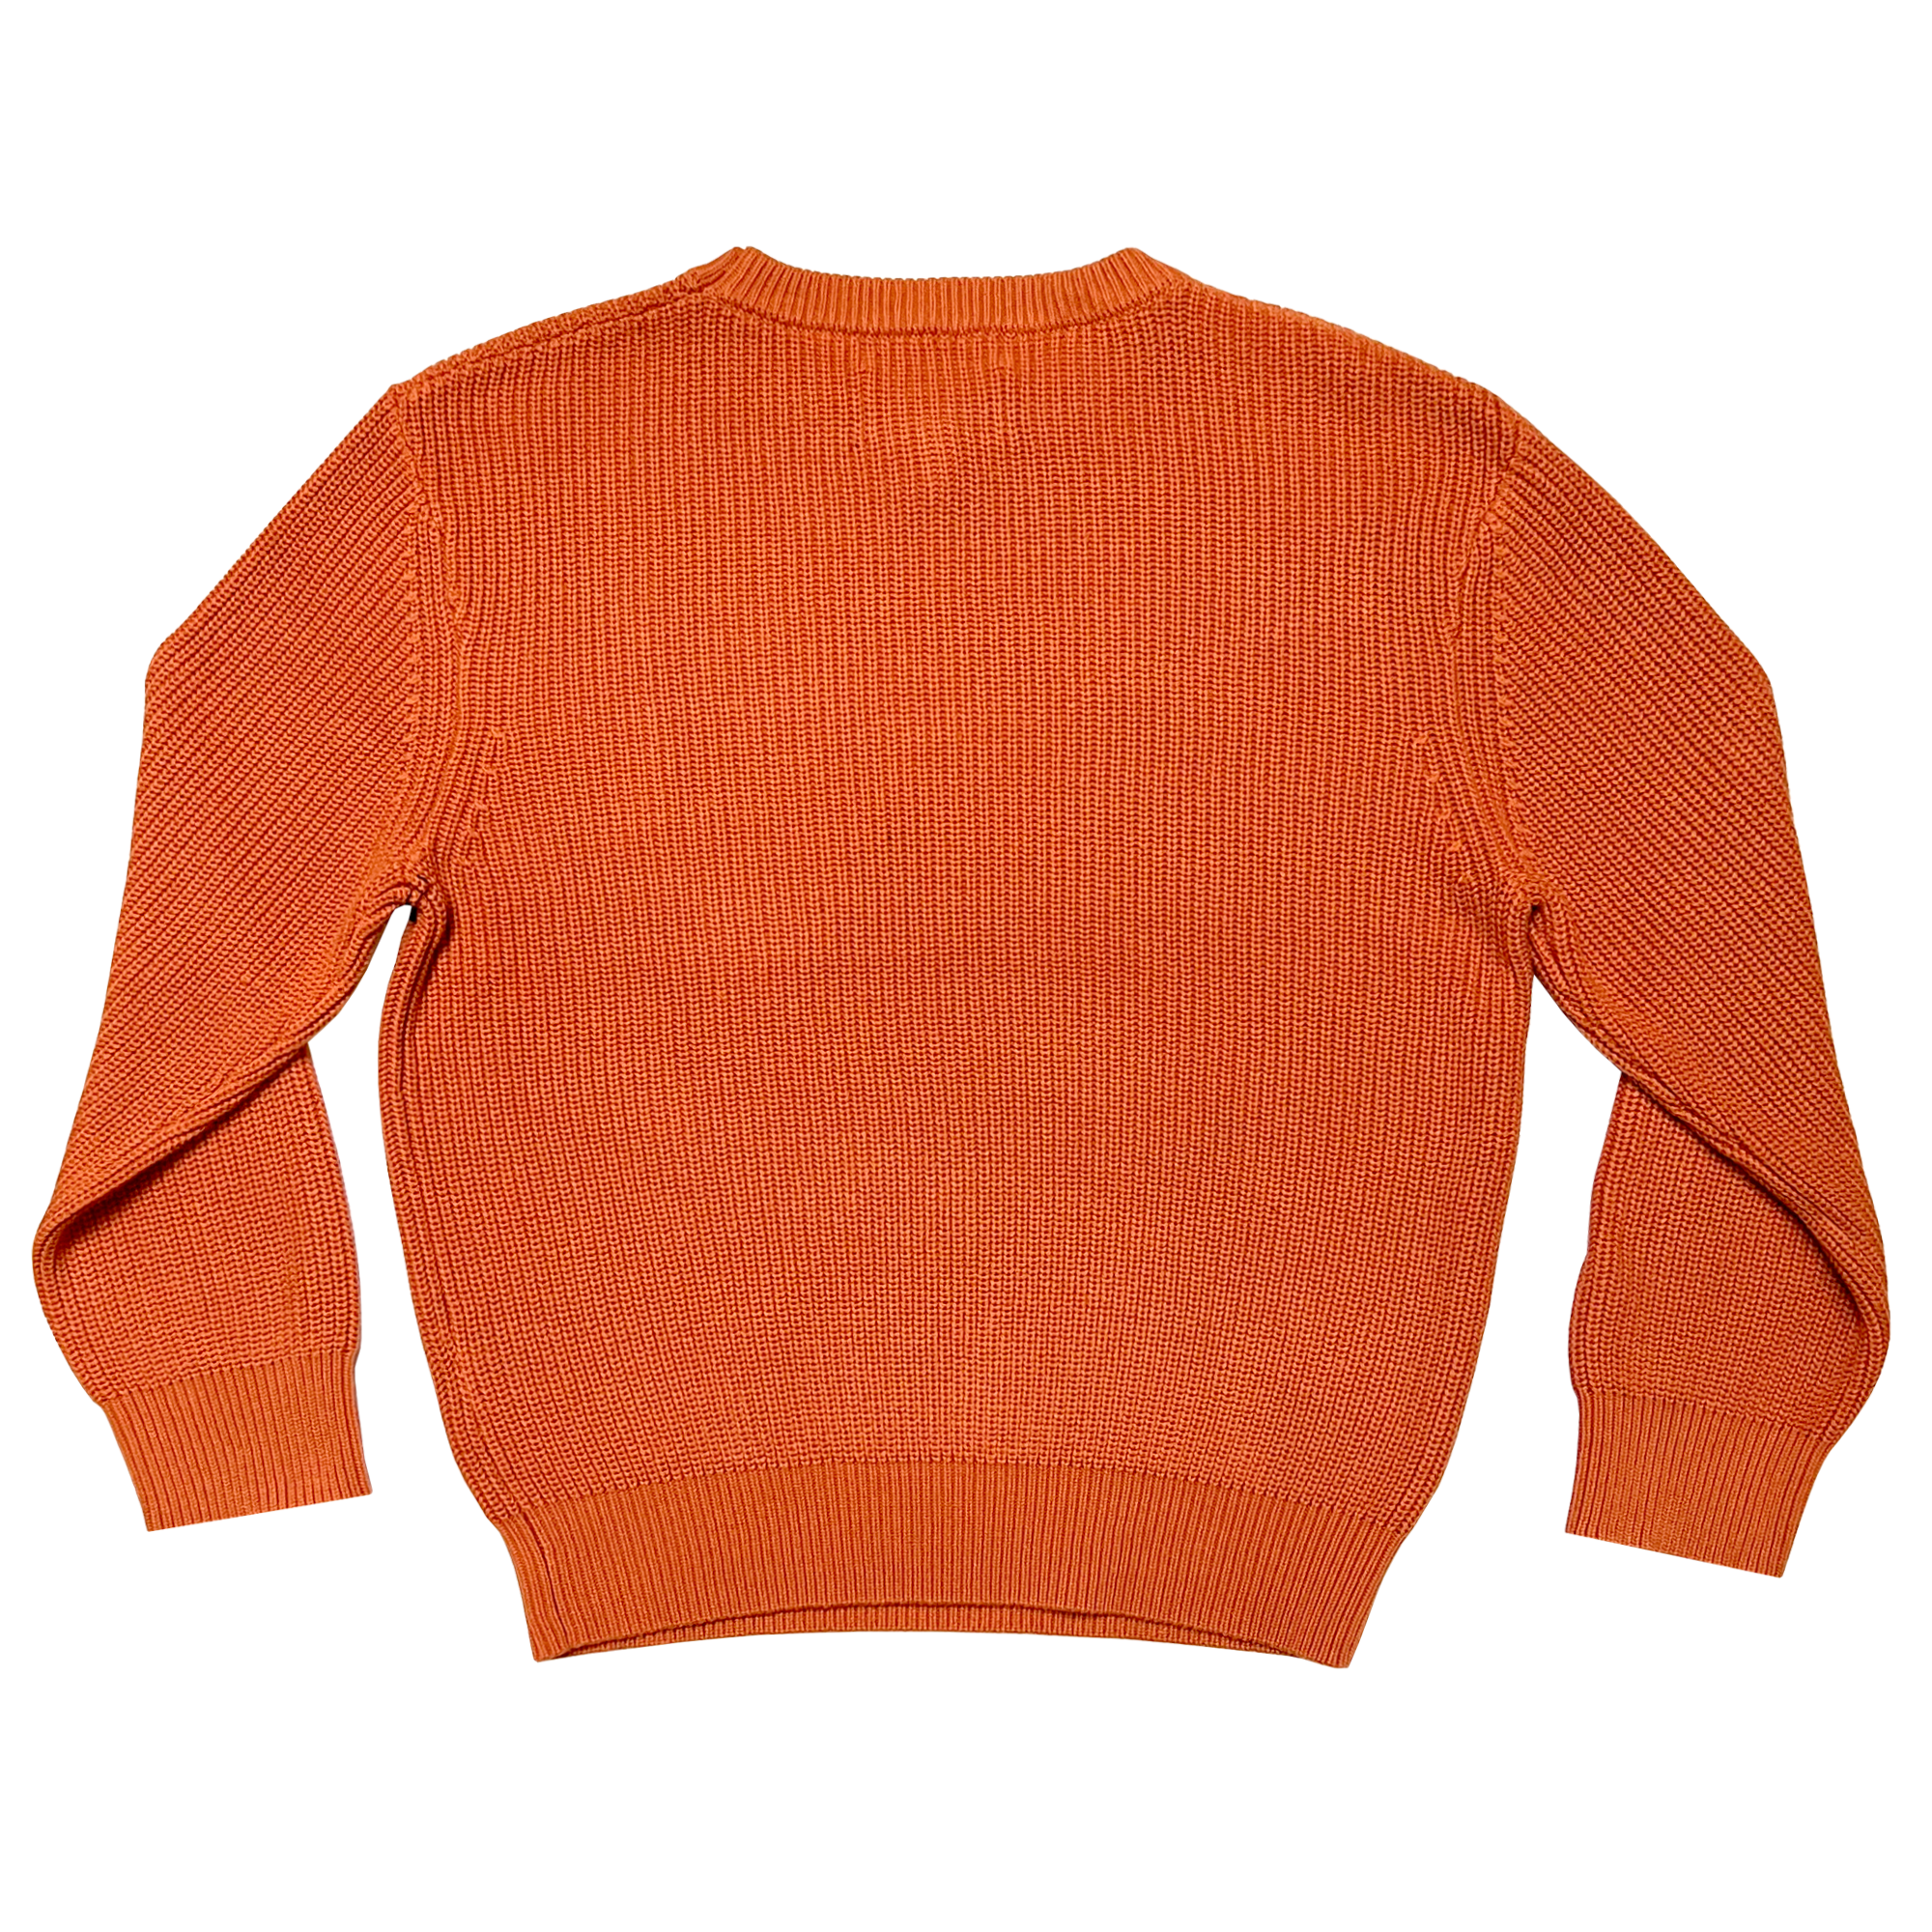 The backside of a heavy cotton knit sweater in autumn orange.